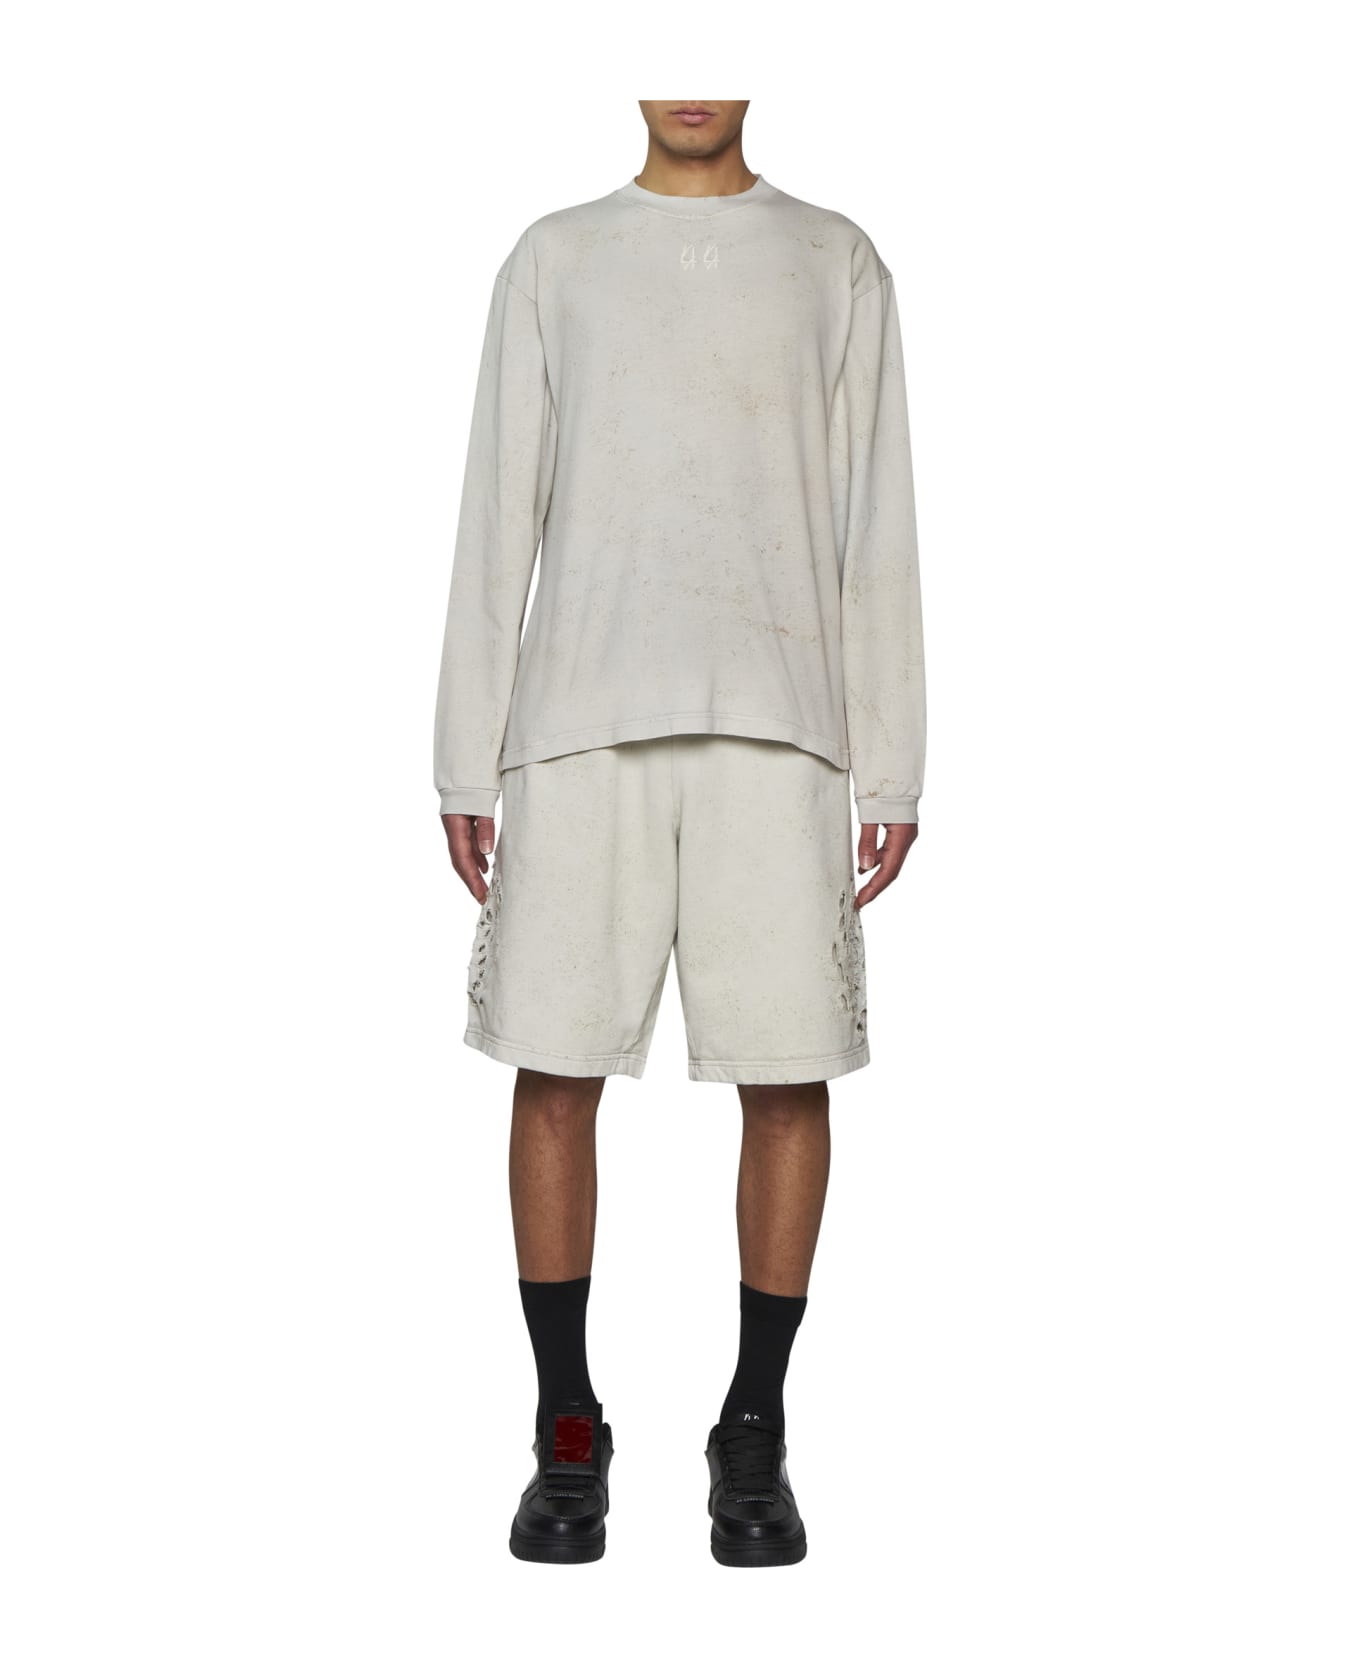 44 Label Group Sweater - Dirty white+gyps